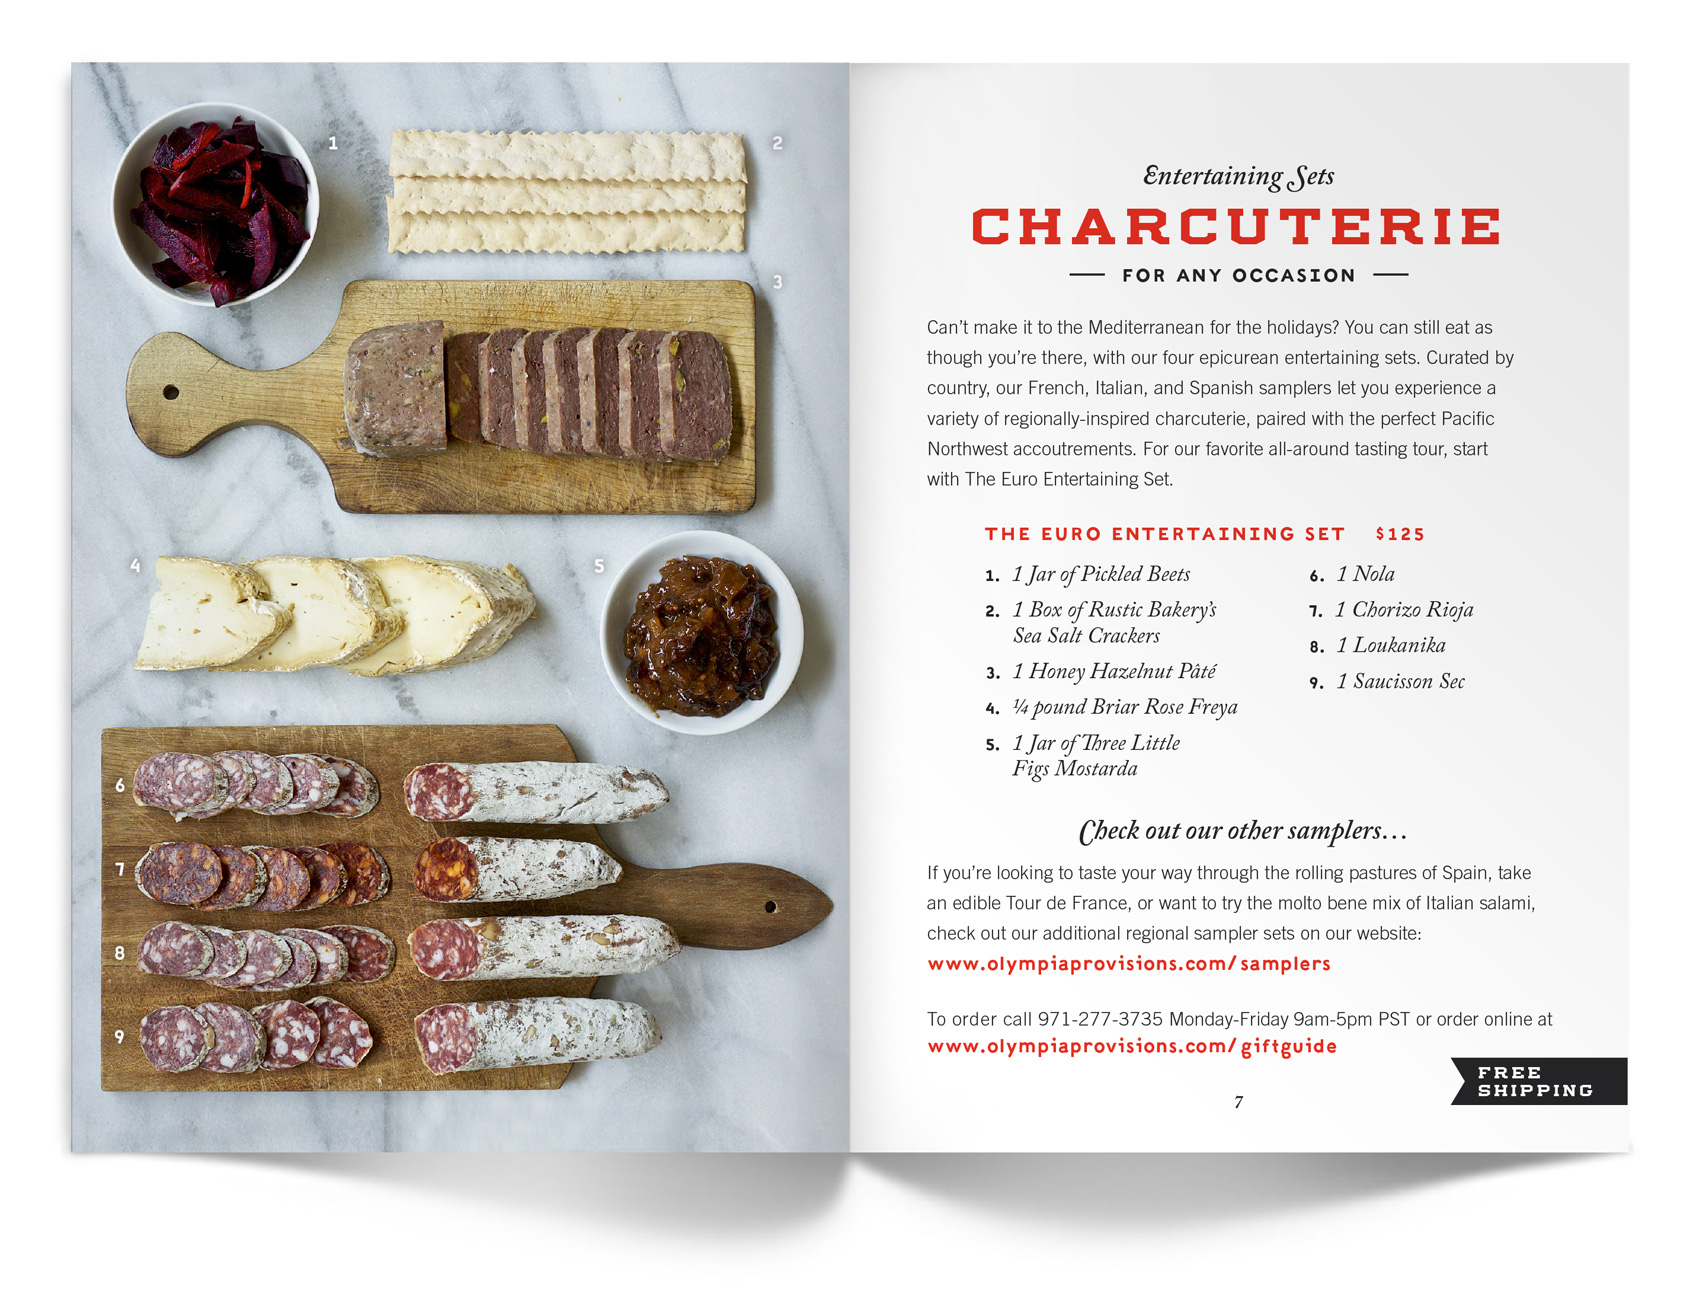 Charcuterie gift sets from Olympia Provisions from their 2017 holiday catalog.